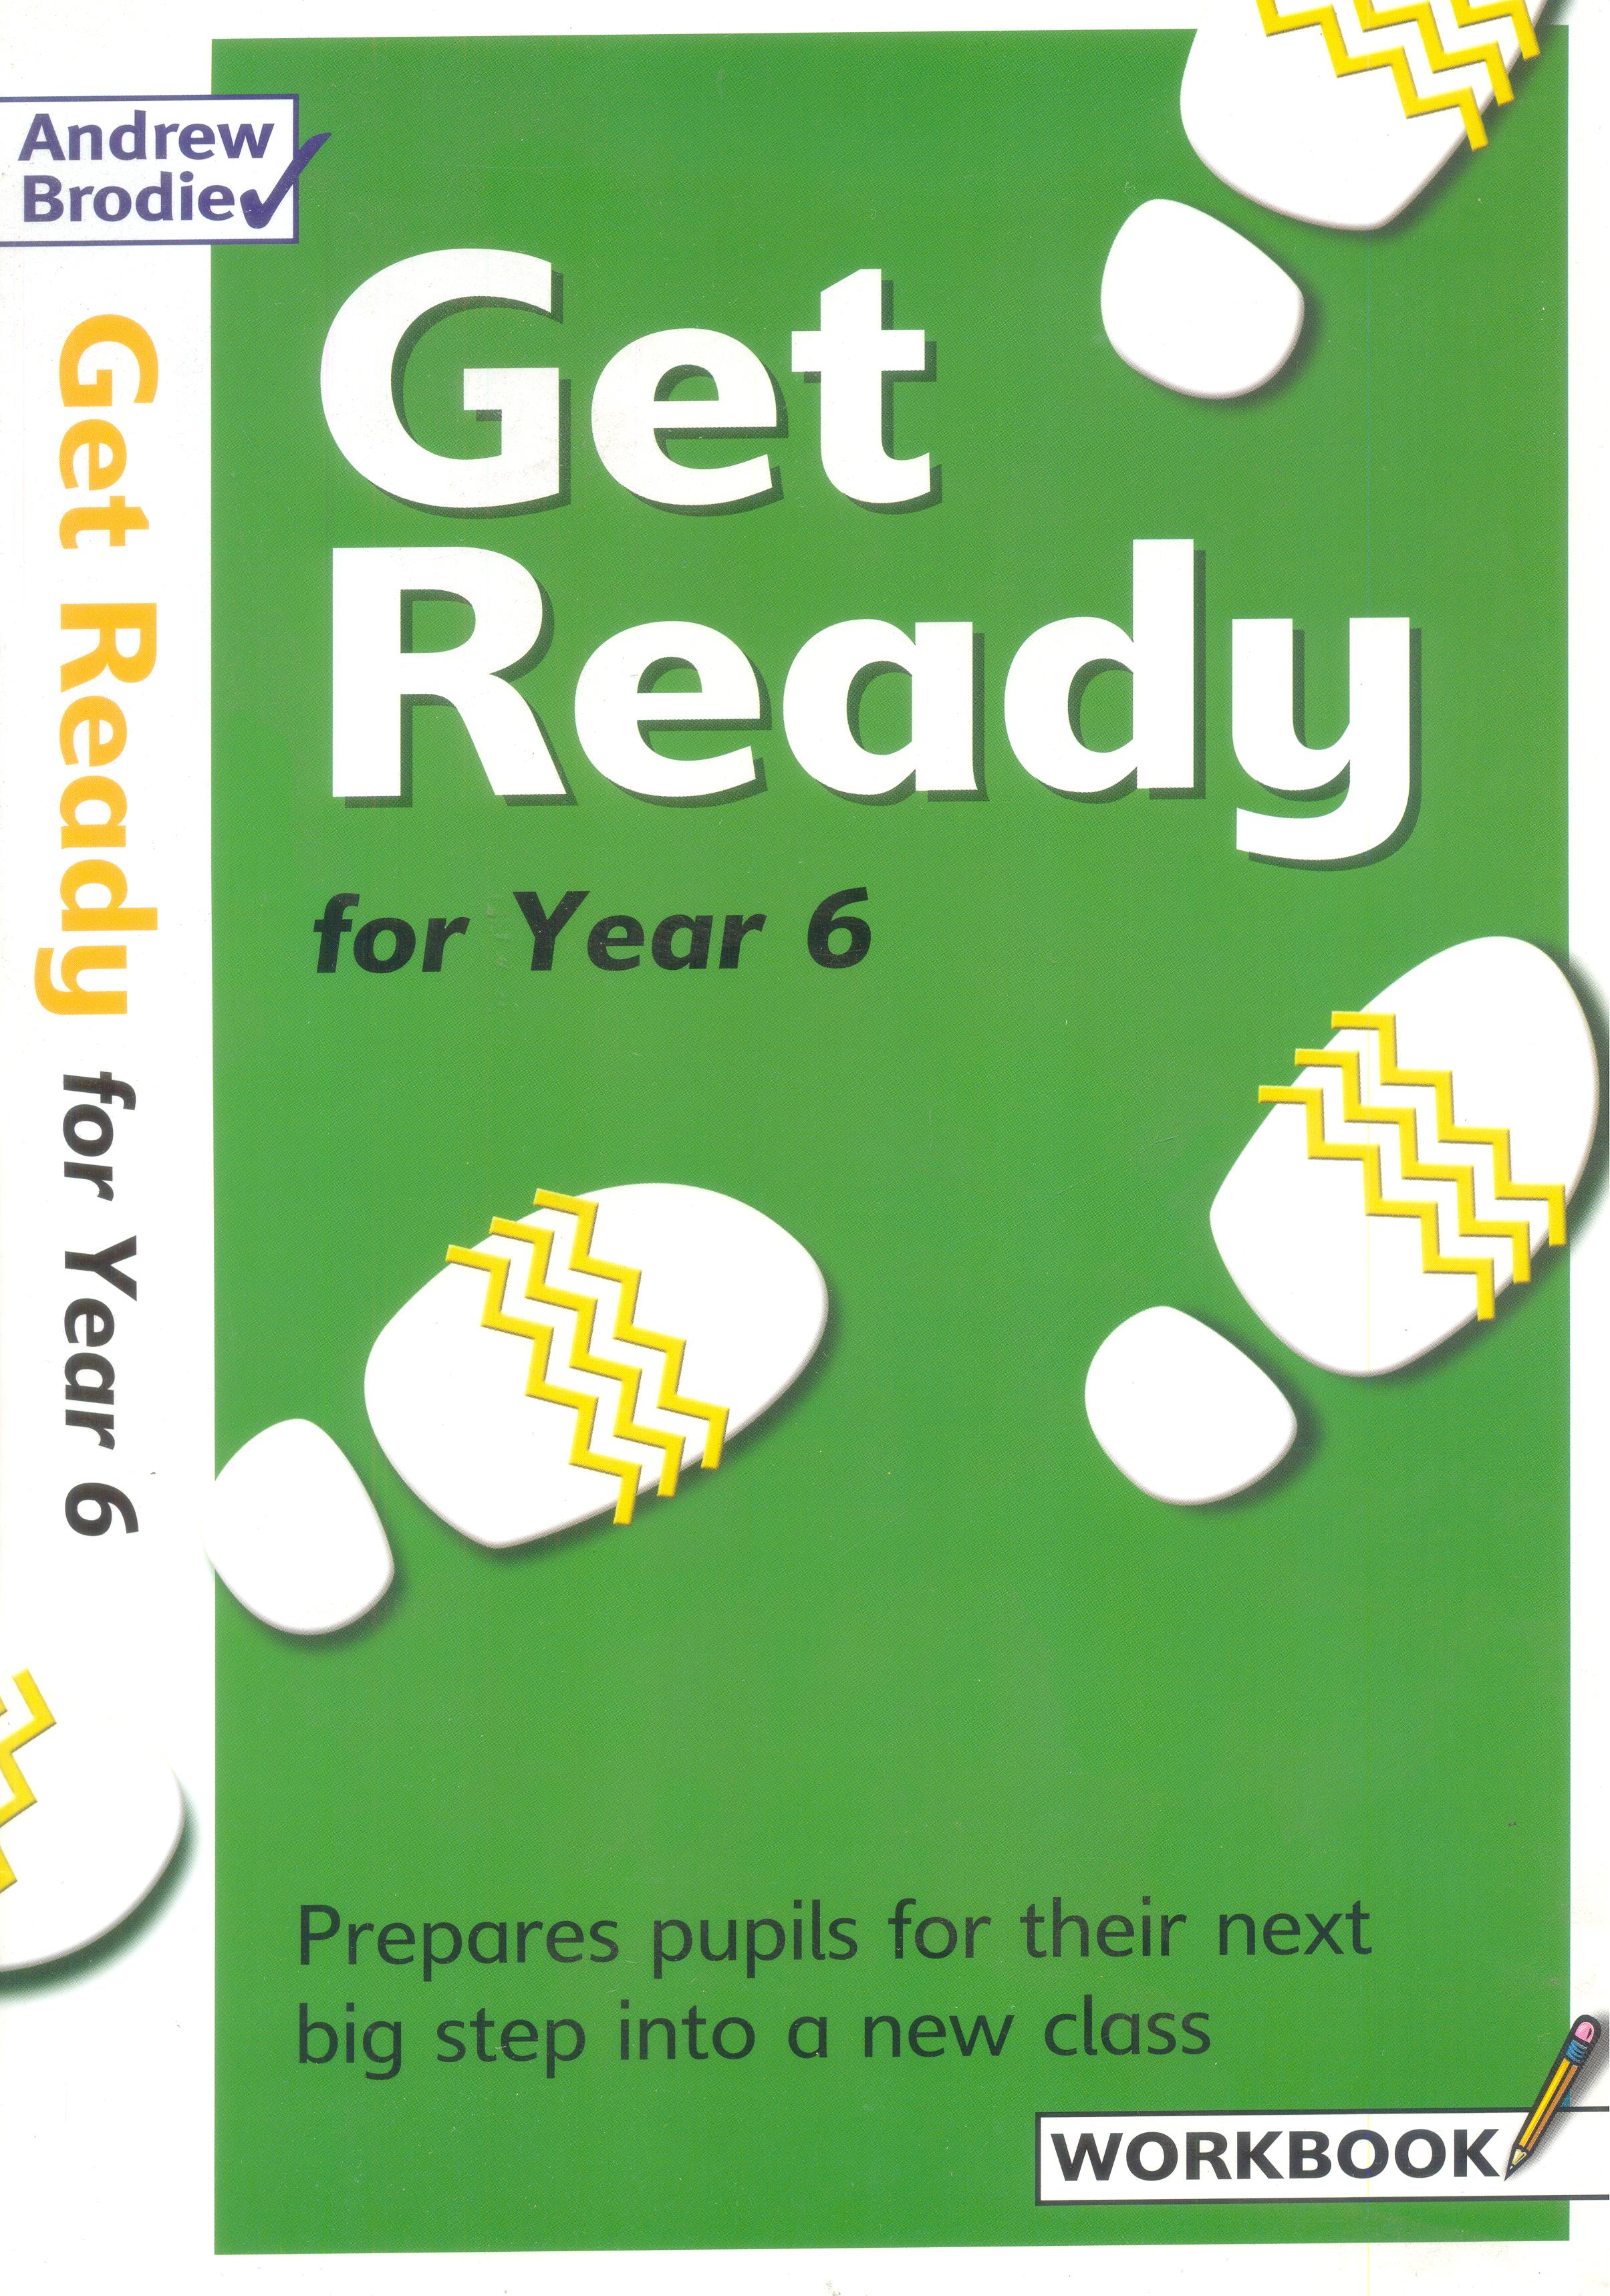 Get Ready For Year 6 Workbook